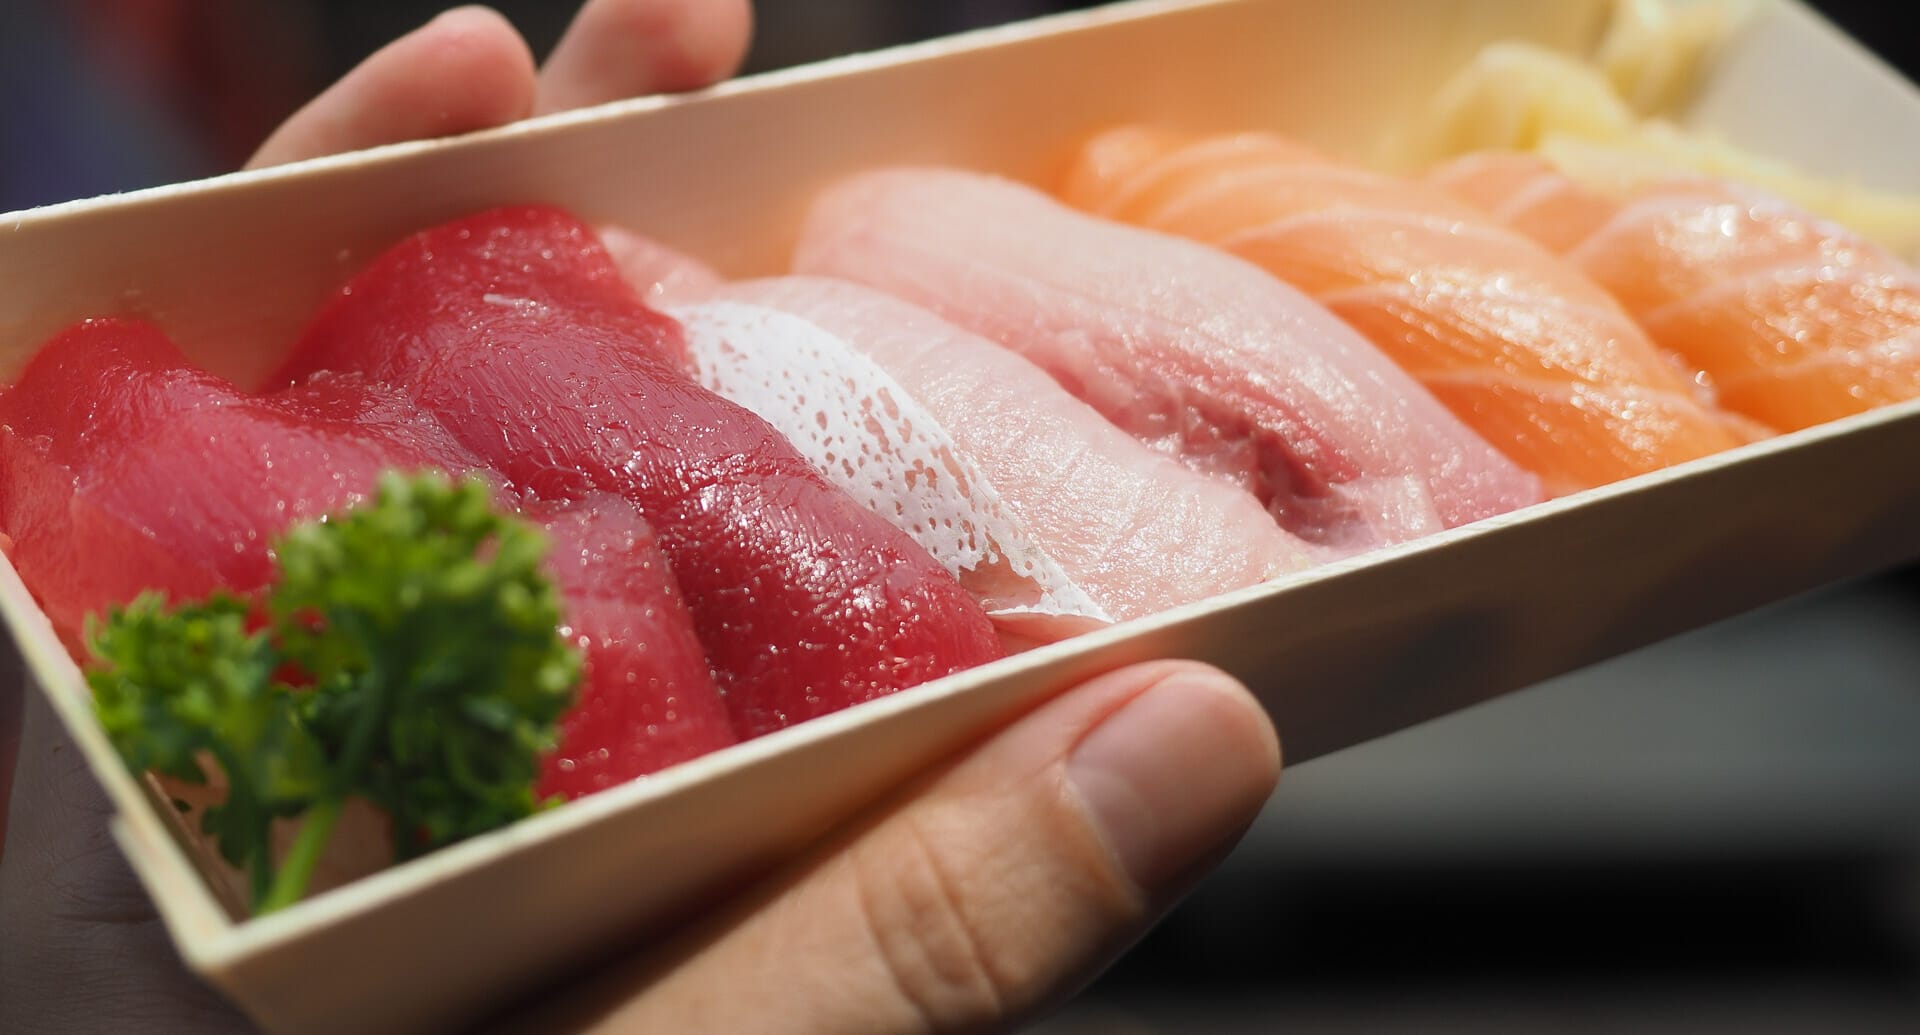 A guide to Taipei's Addiction Aquatic Development, which has the best sushi in Taipei